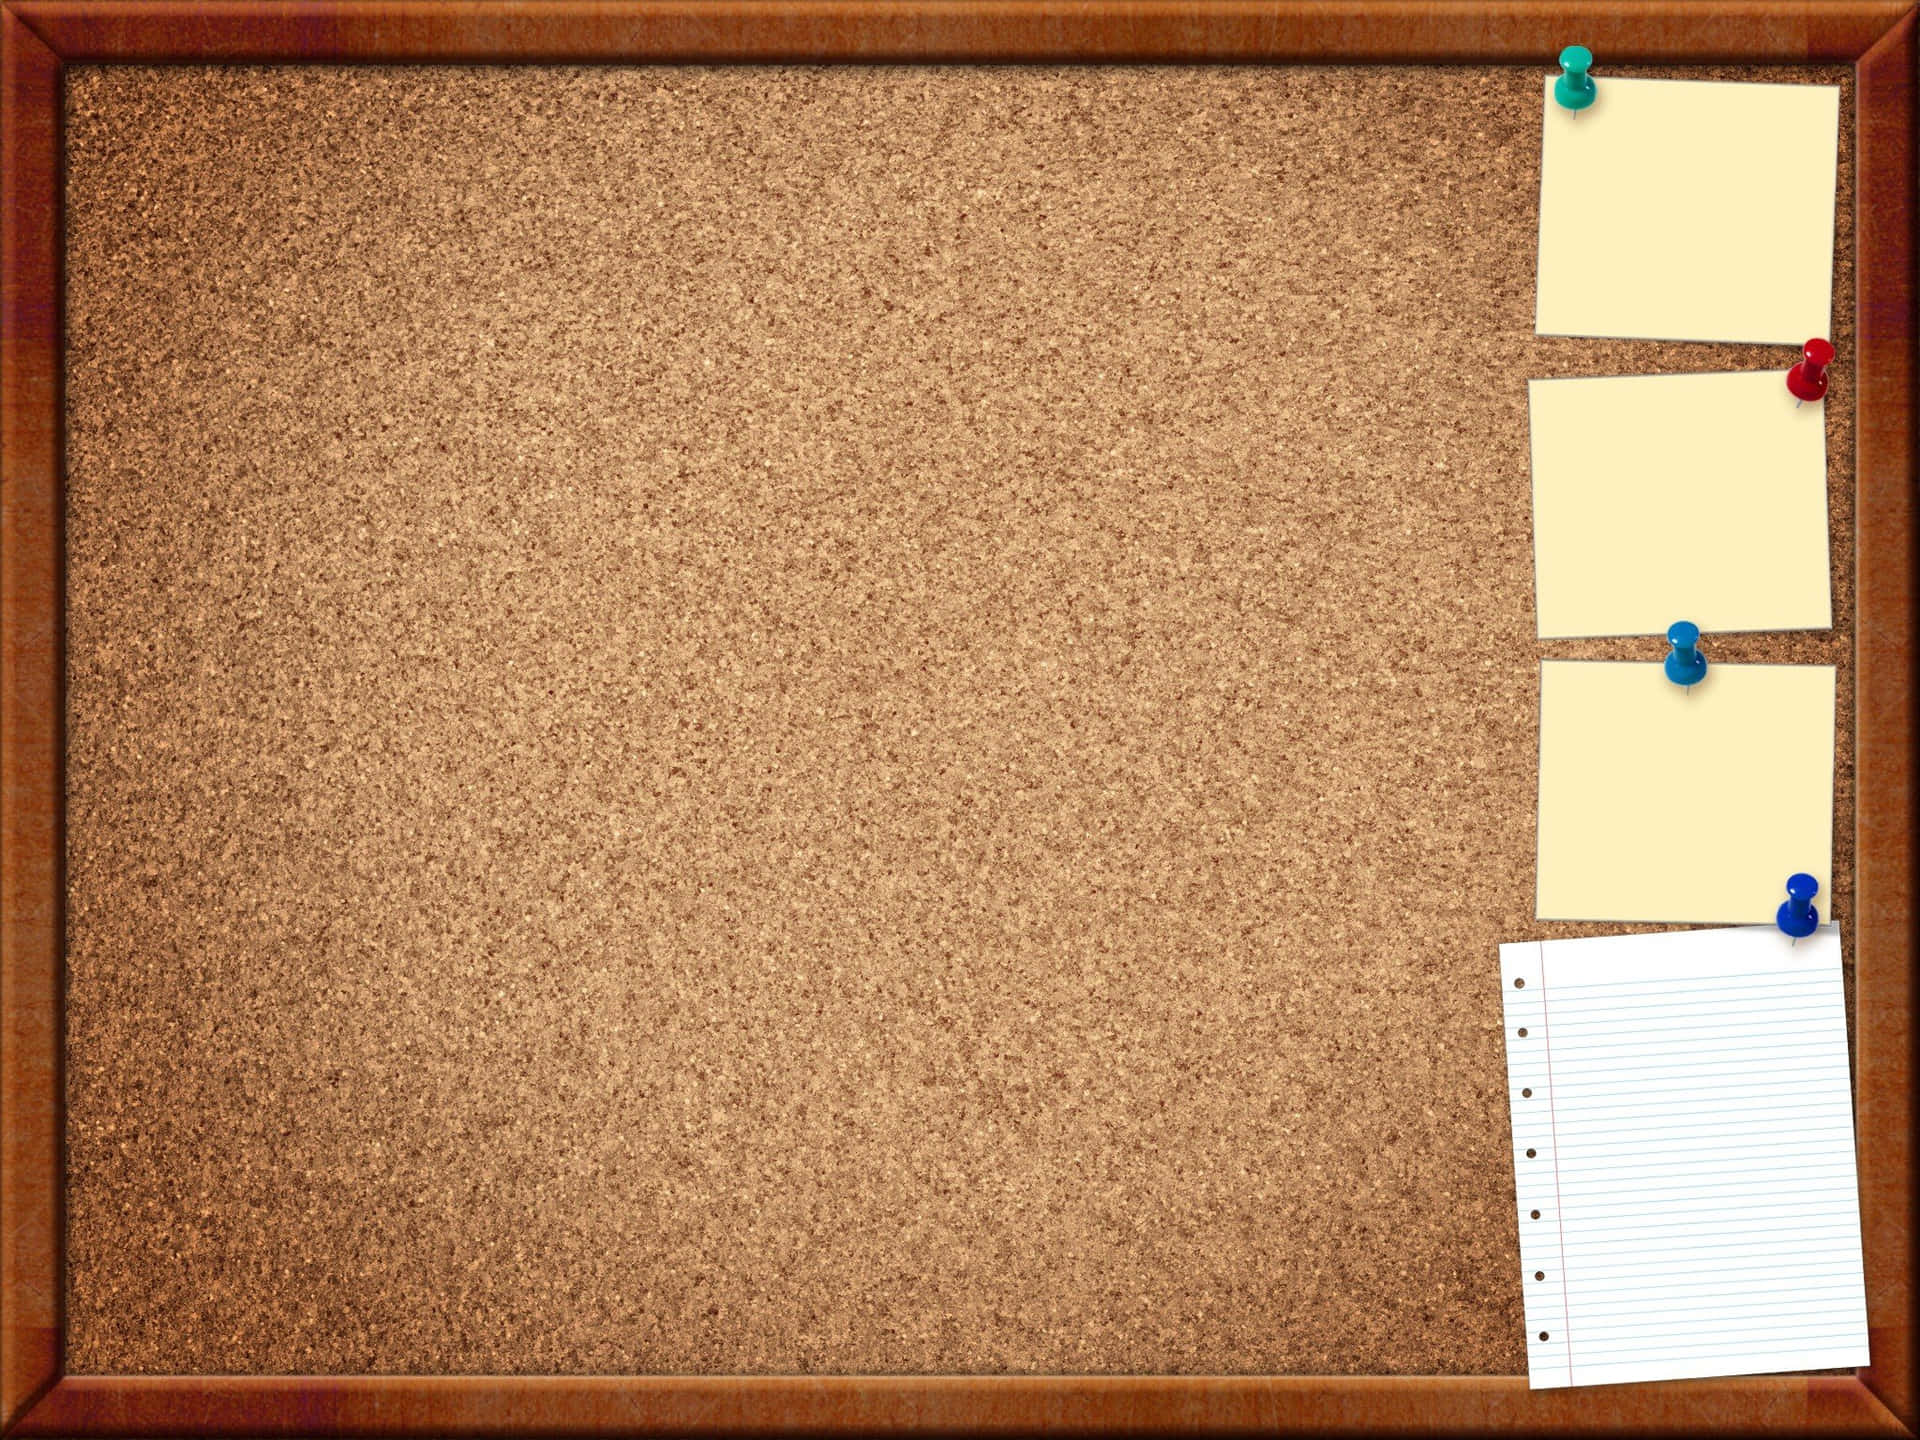 Get Creative with Our Cork Board!